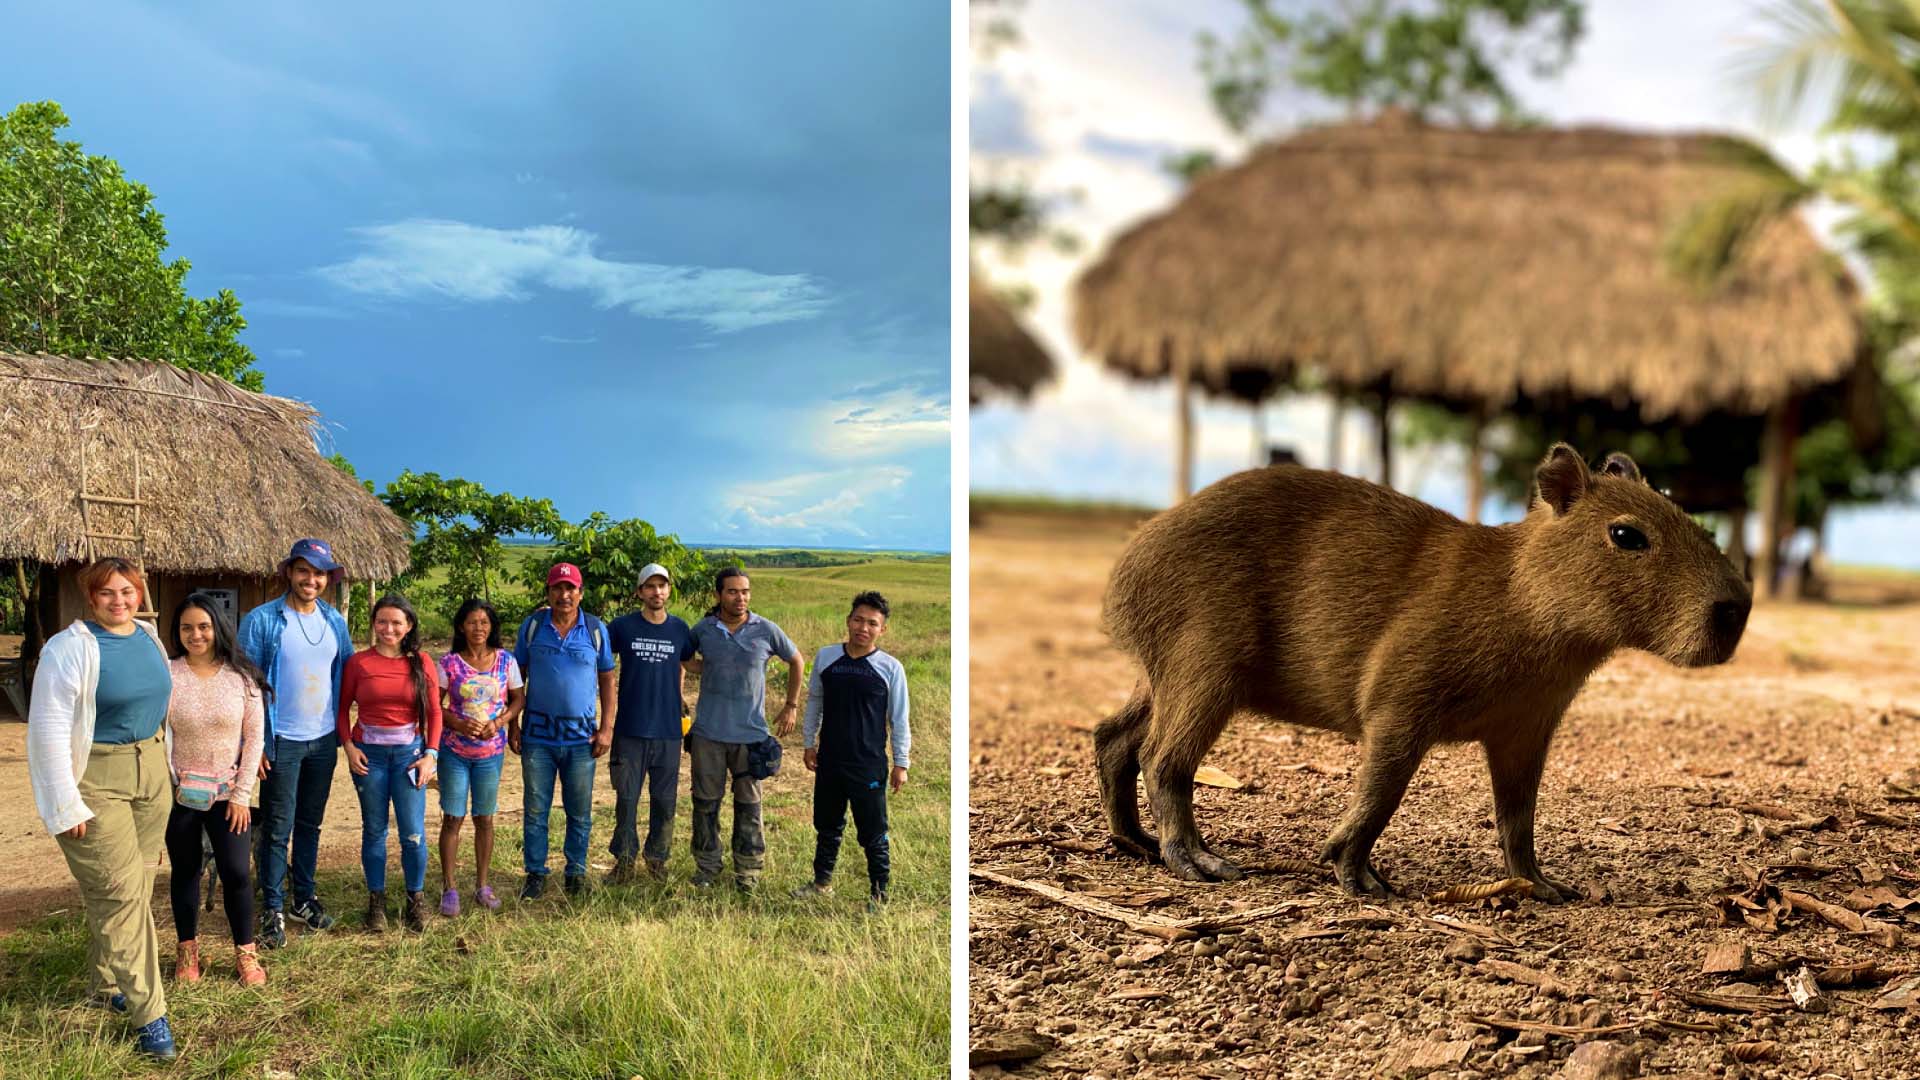 Side-by-side images: The research team dressed in casual clothes smiling and standing in a row on a grassy plain with two structures of straw-thatched roofs in the background; A small, brown capybara in the foreground on a brown, wood-chipped cover ground with green trees and straw-thatched roofs in the background